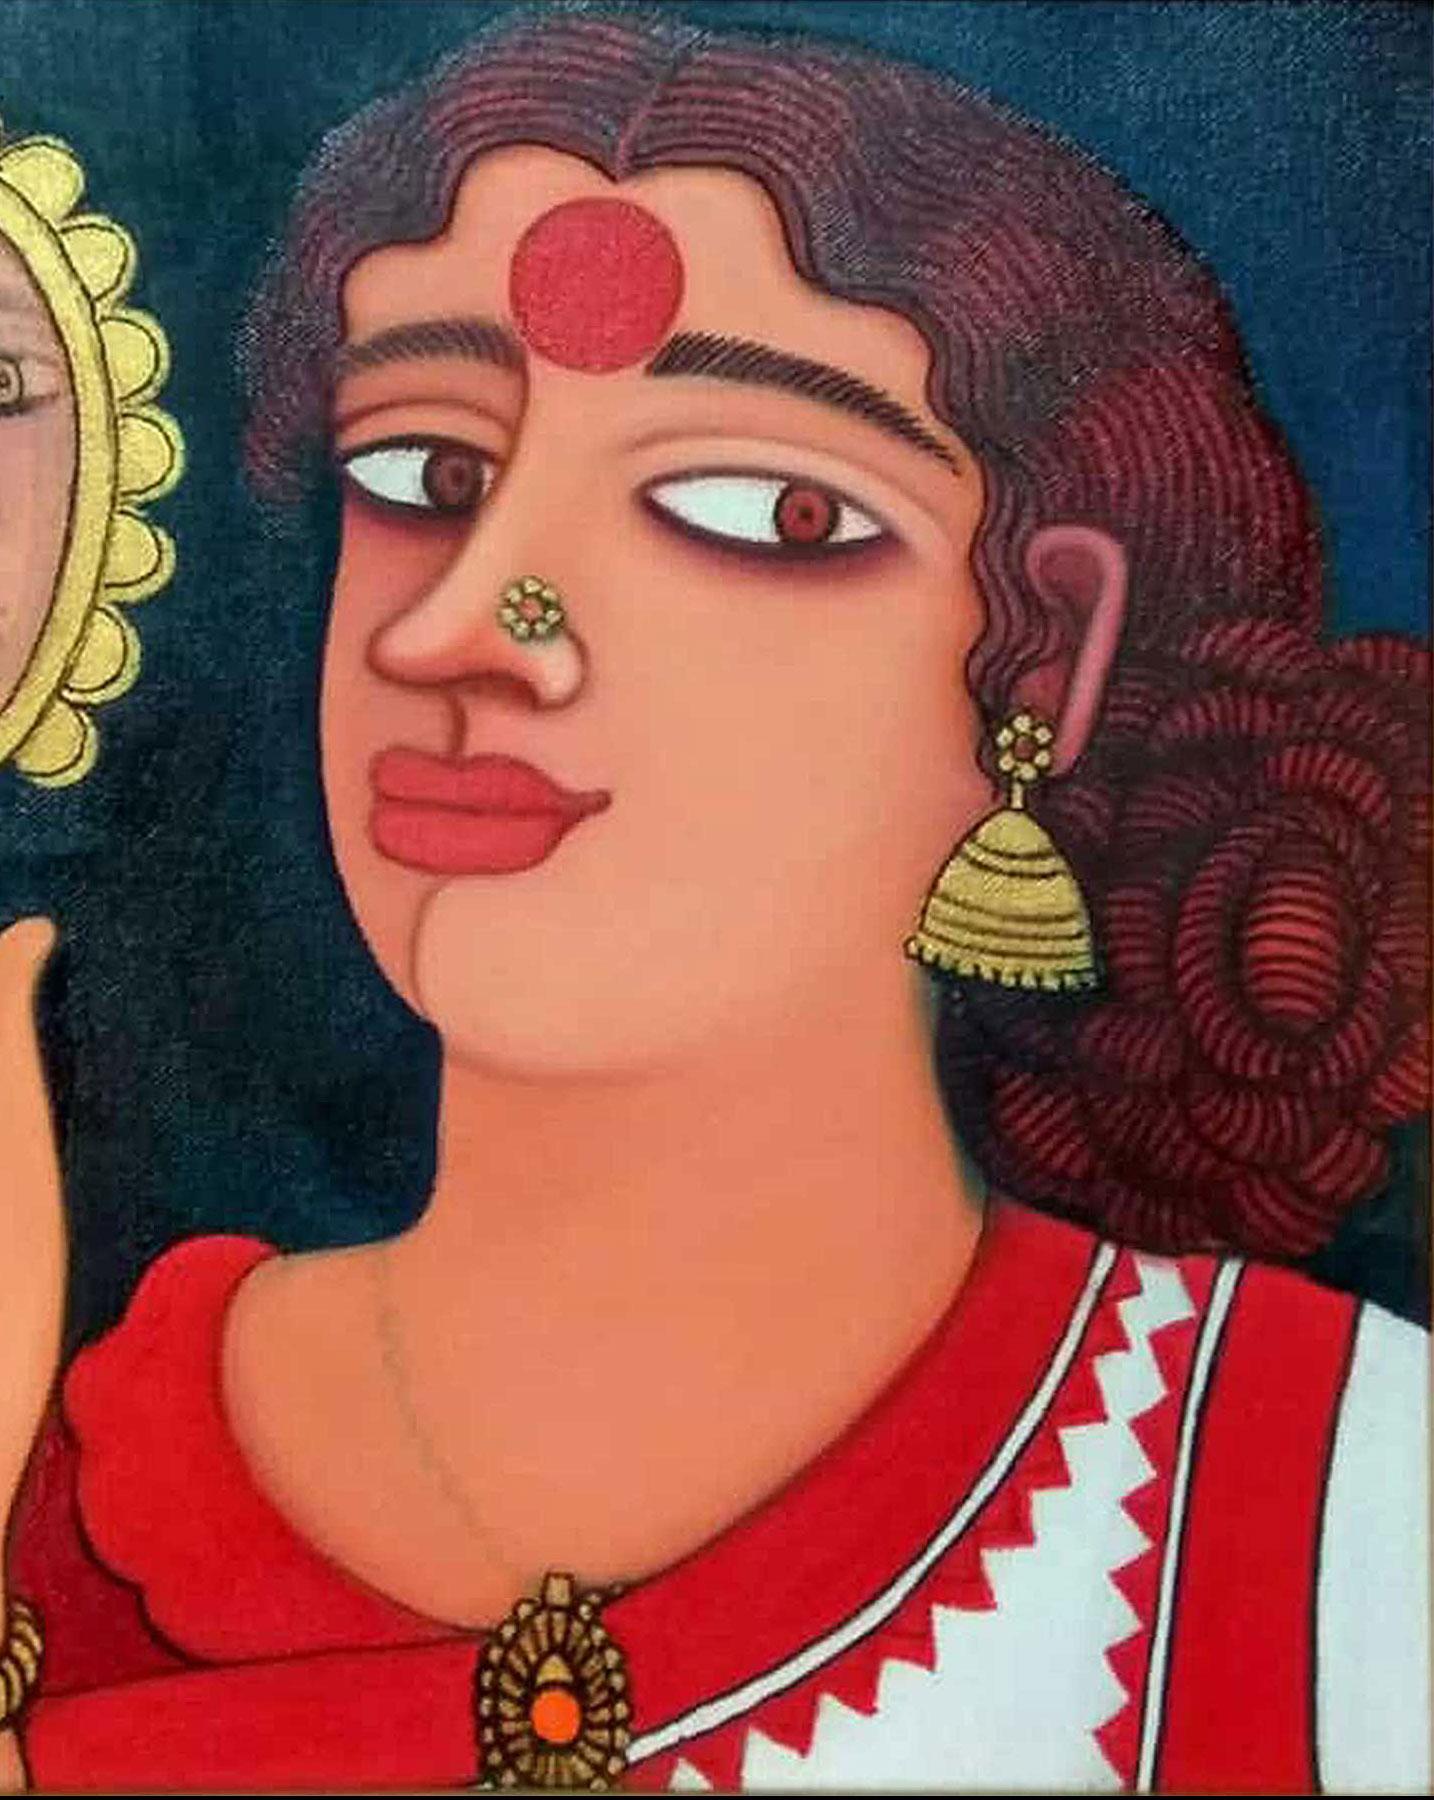 Shipra Bhattacharya  - Untitled - 12 x 12 inches (unframed size)
Acrylic & Oil on canvas
Inclusive of shipment in a roll form.

Style : Shipra , is a leading contemporary mid career artist of India. Shipra Bhattacharya’s work has dealt with women’s